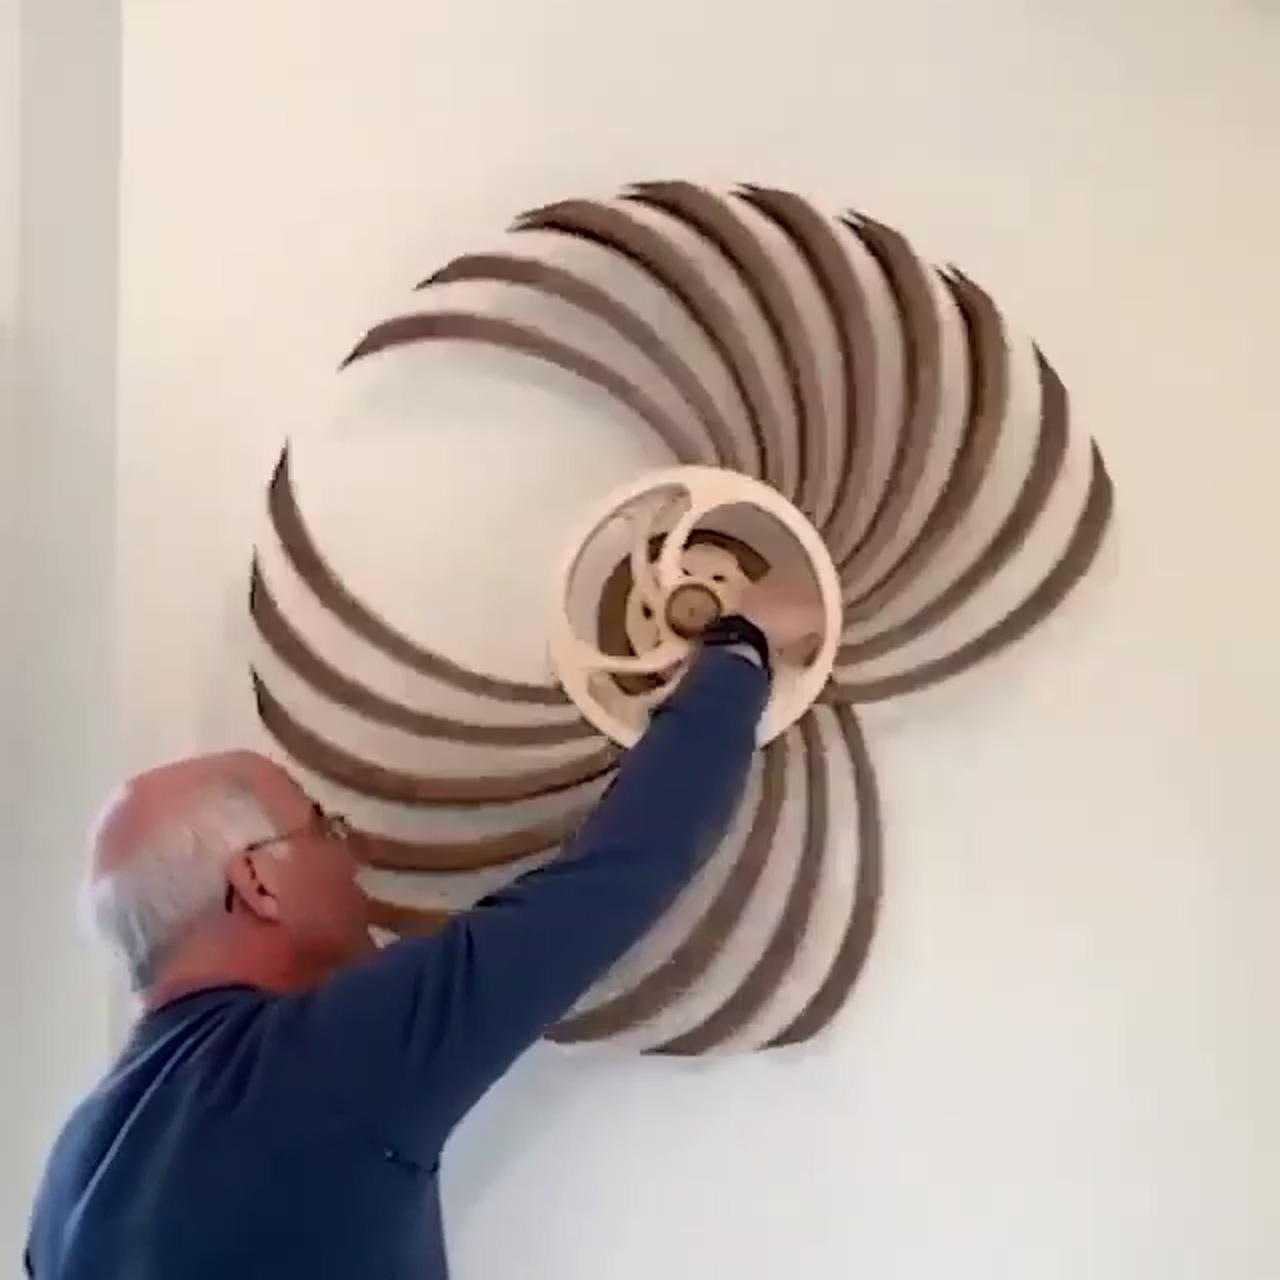 100% handmade kinetic wooden sculpture; oh my god, i'm going to take a shower and watch it, it's so good